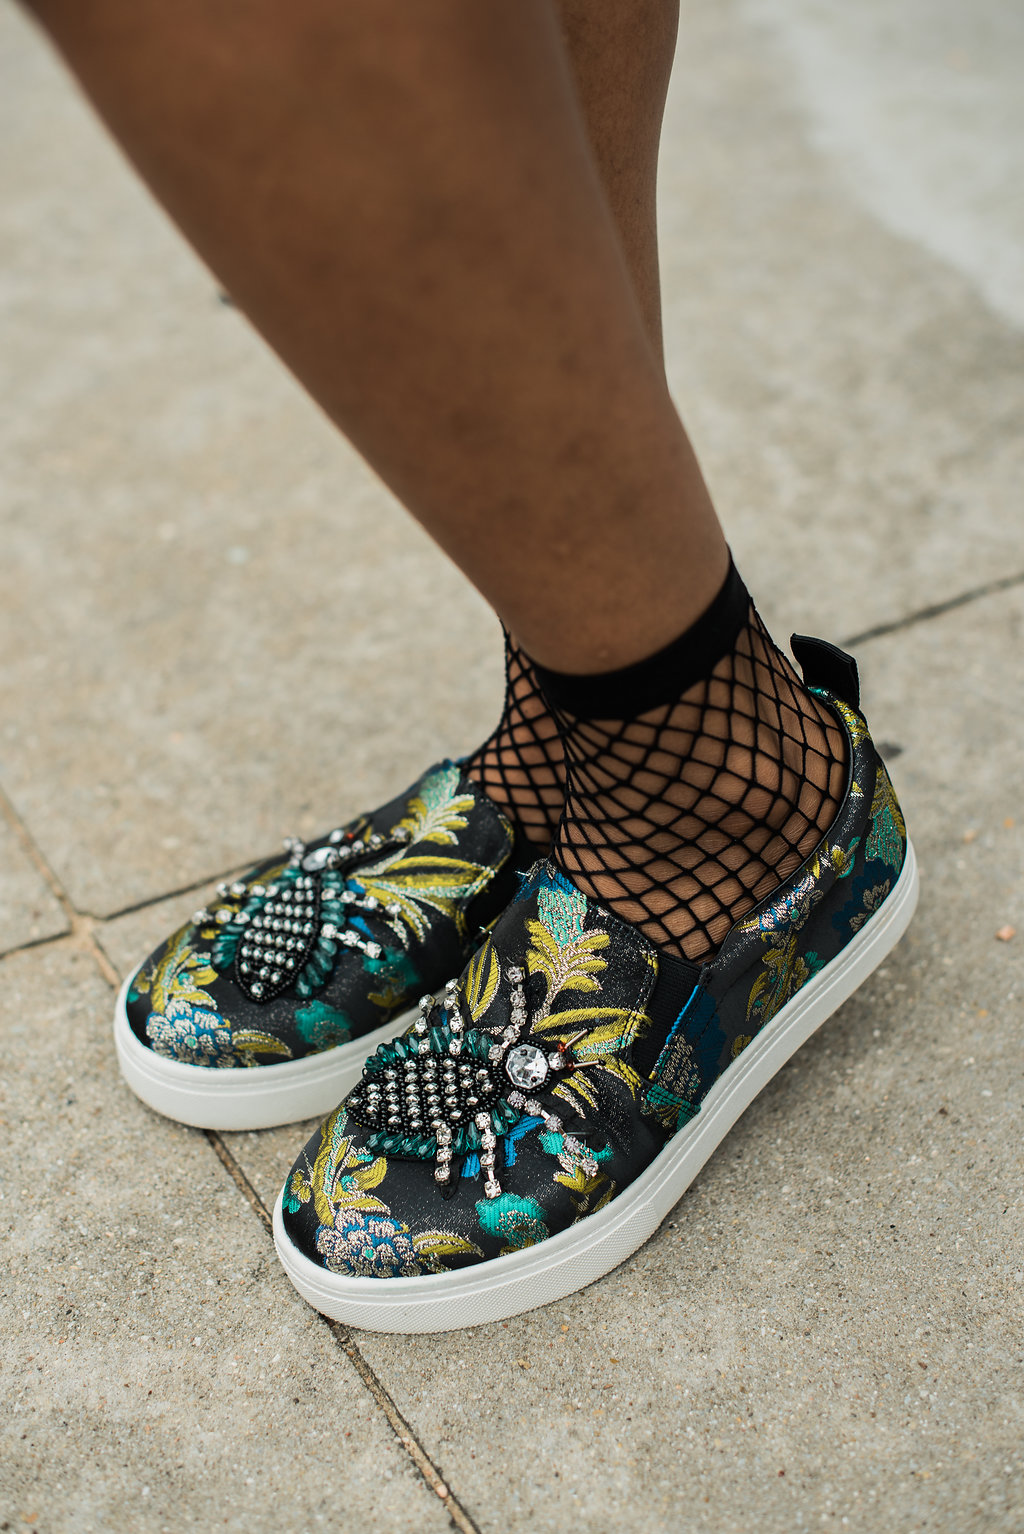 how to wear embellished sneakers